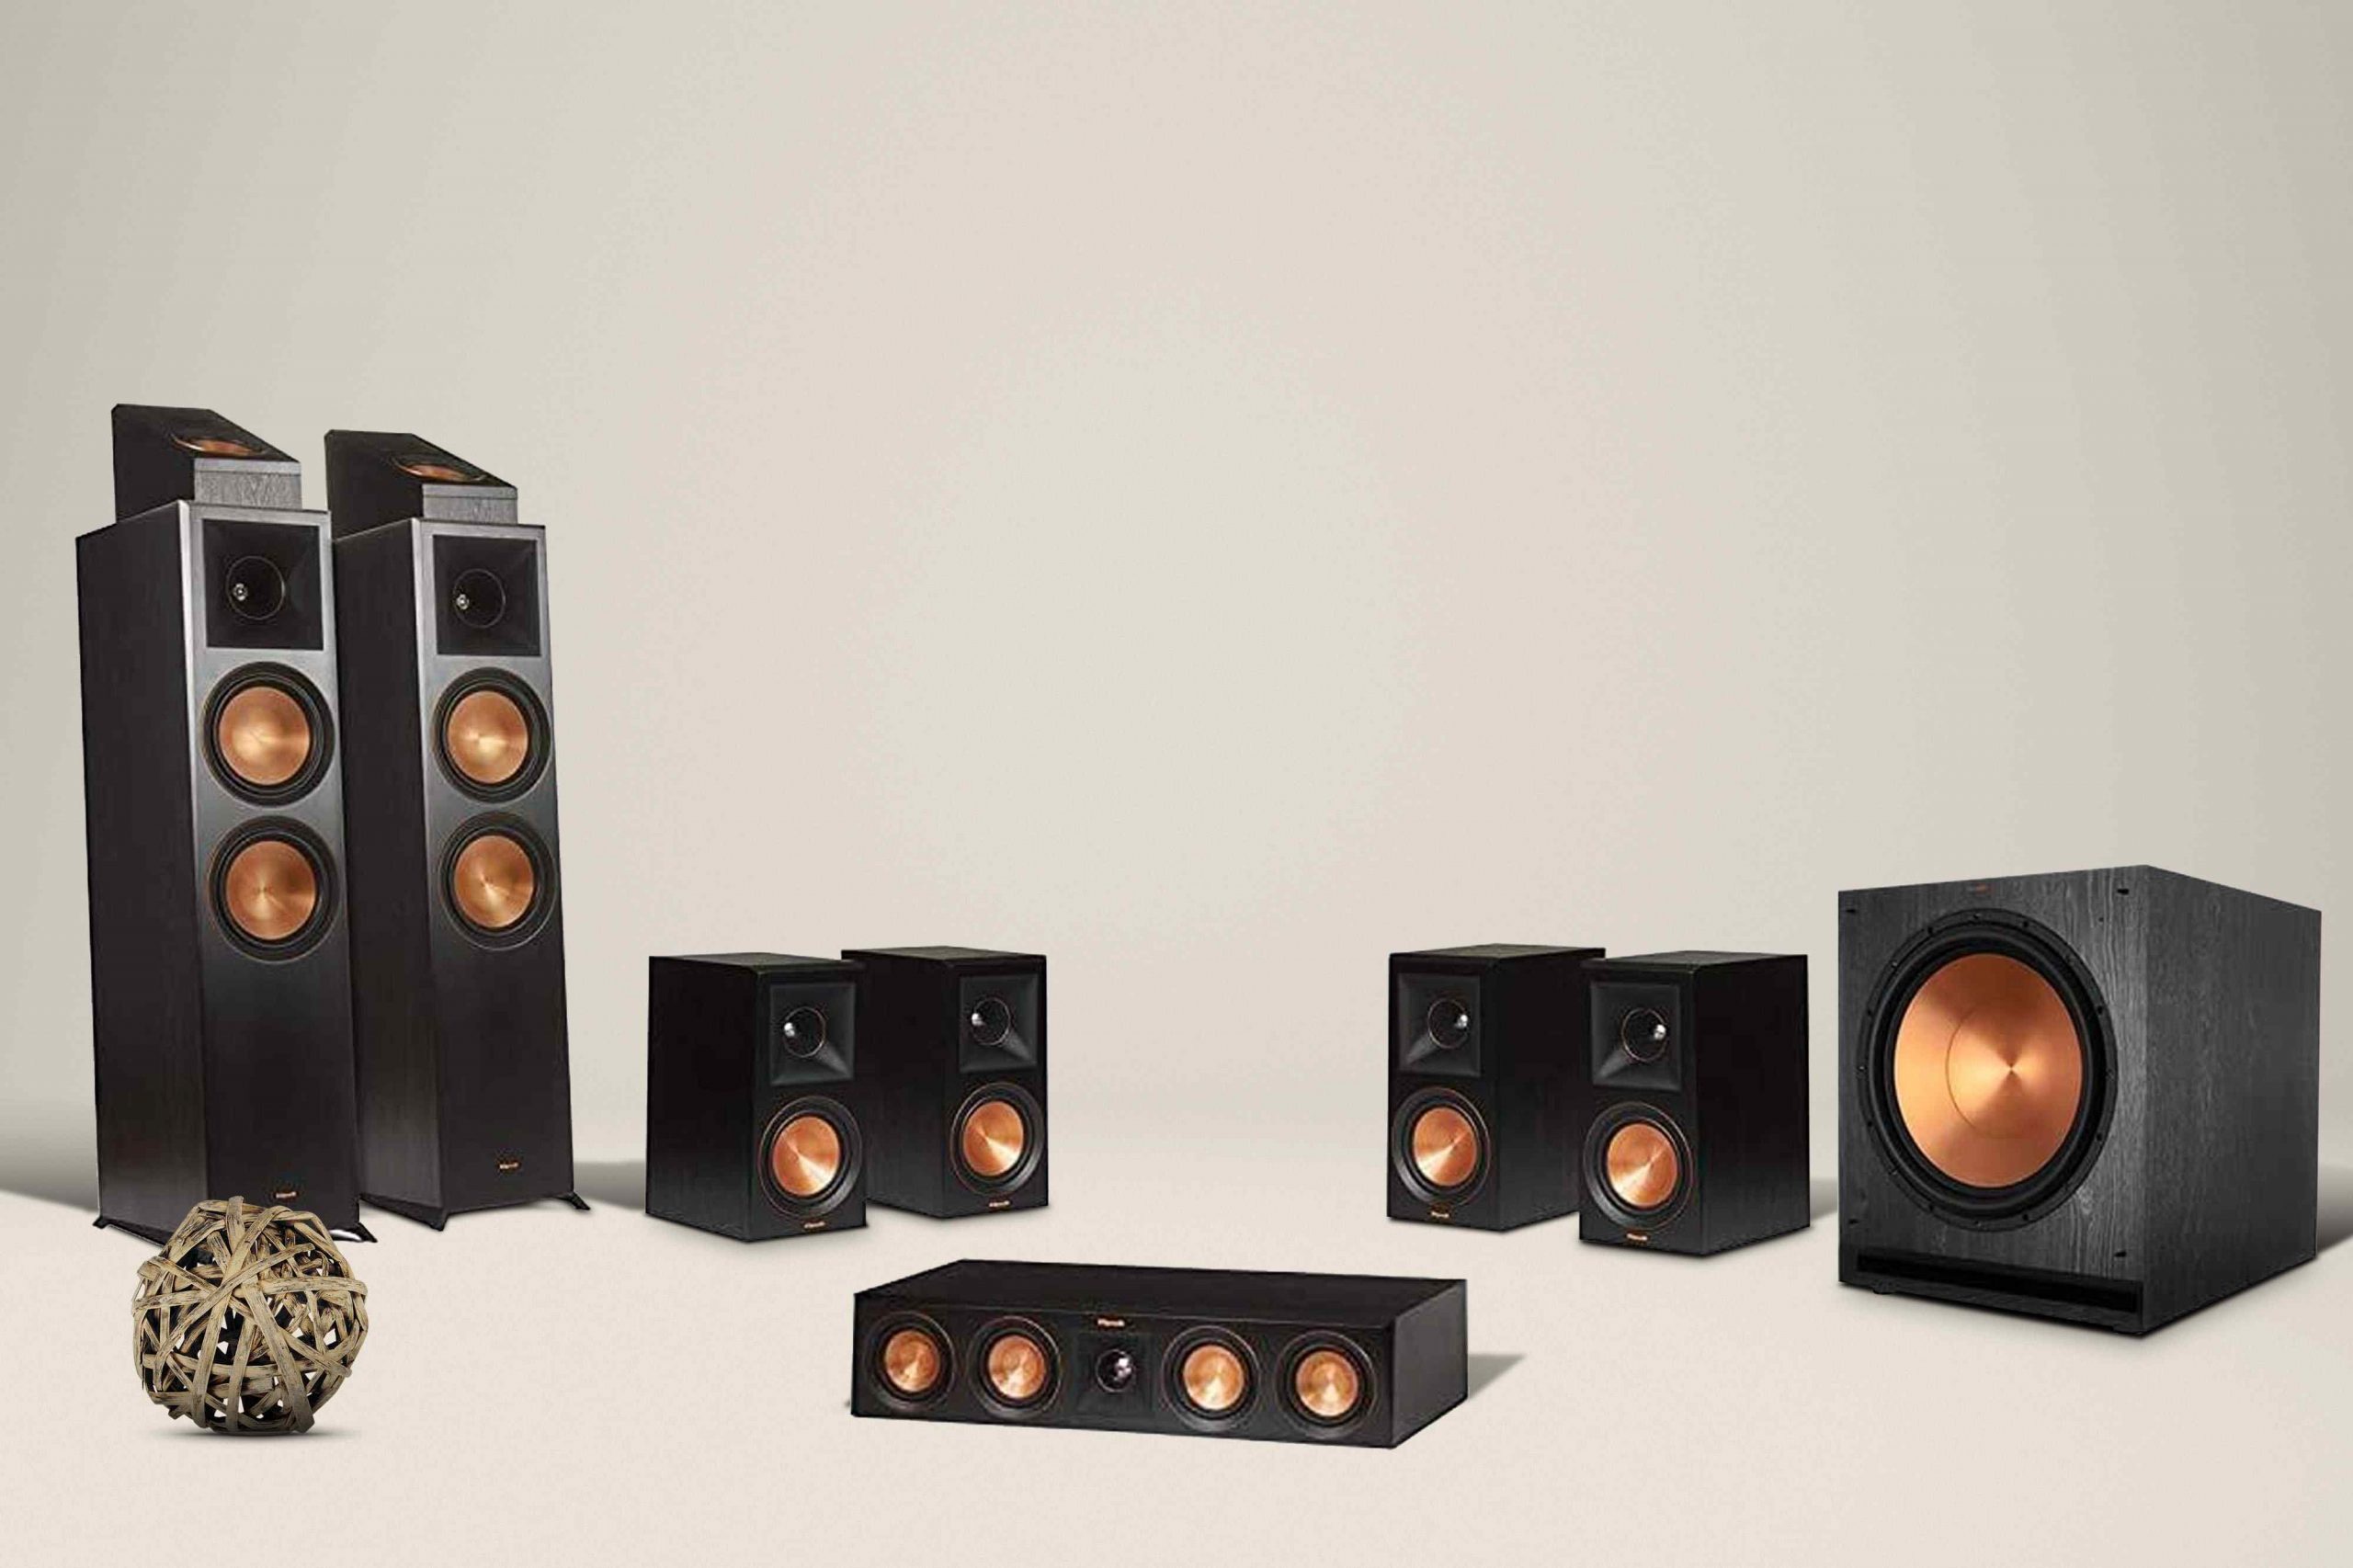 Best 7.1 Home Theater Systems: Reviews & Buying Guide